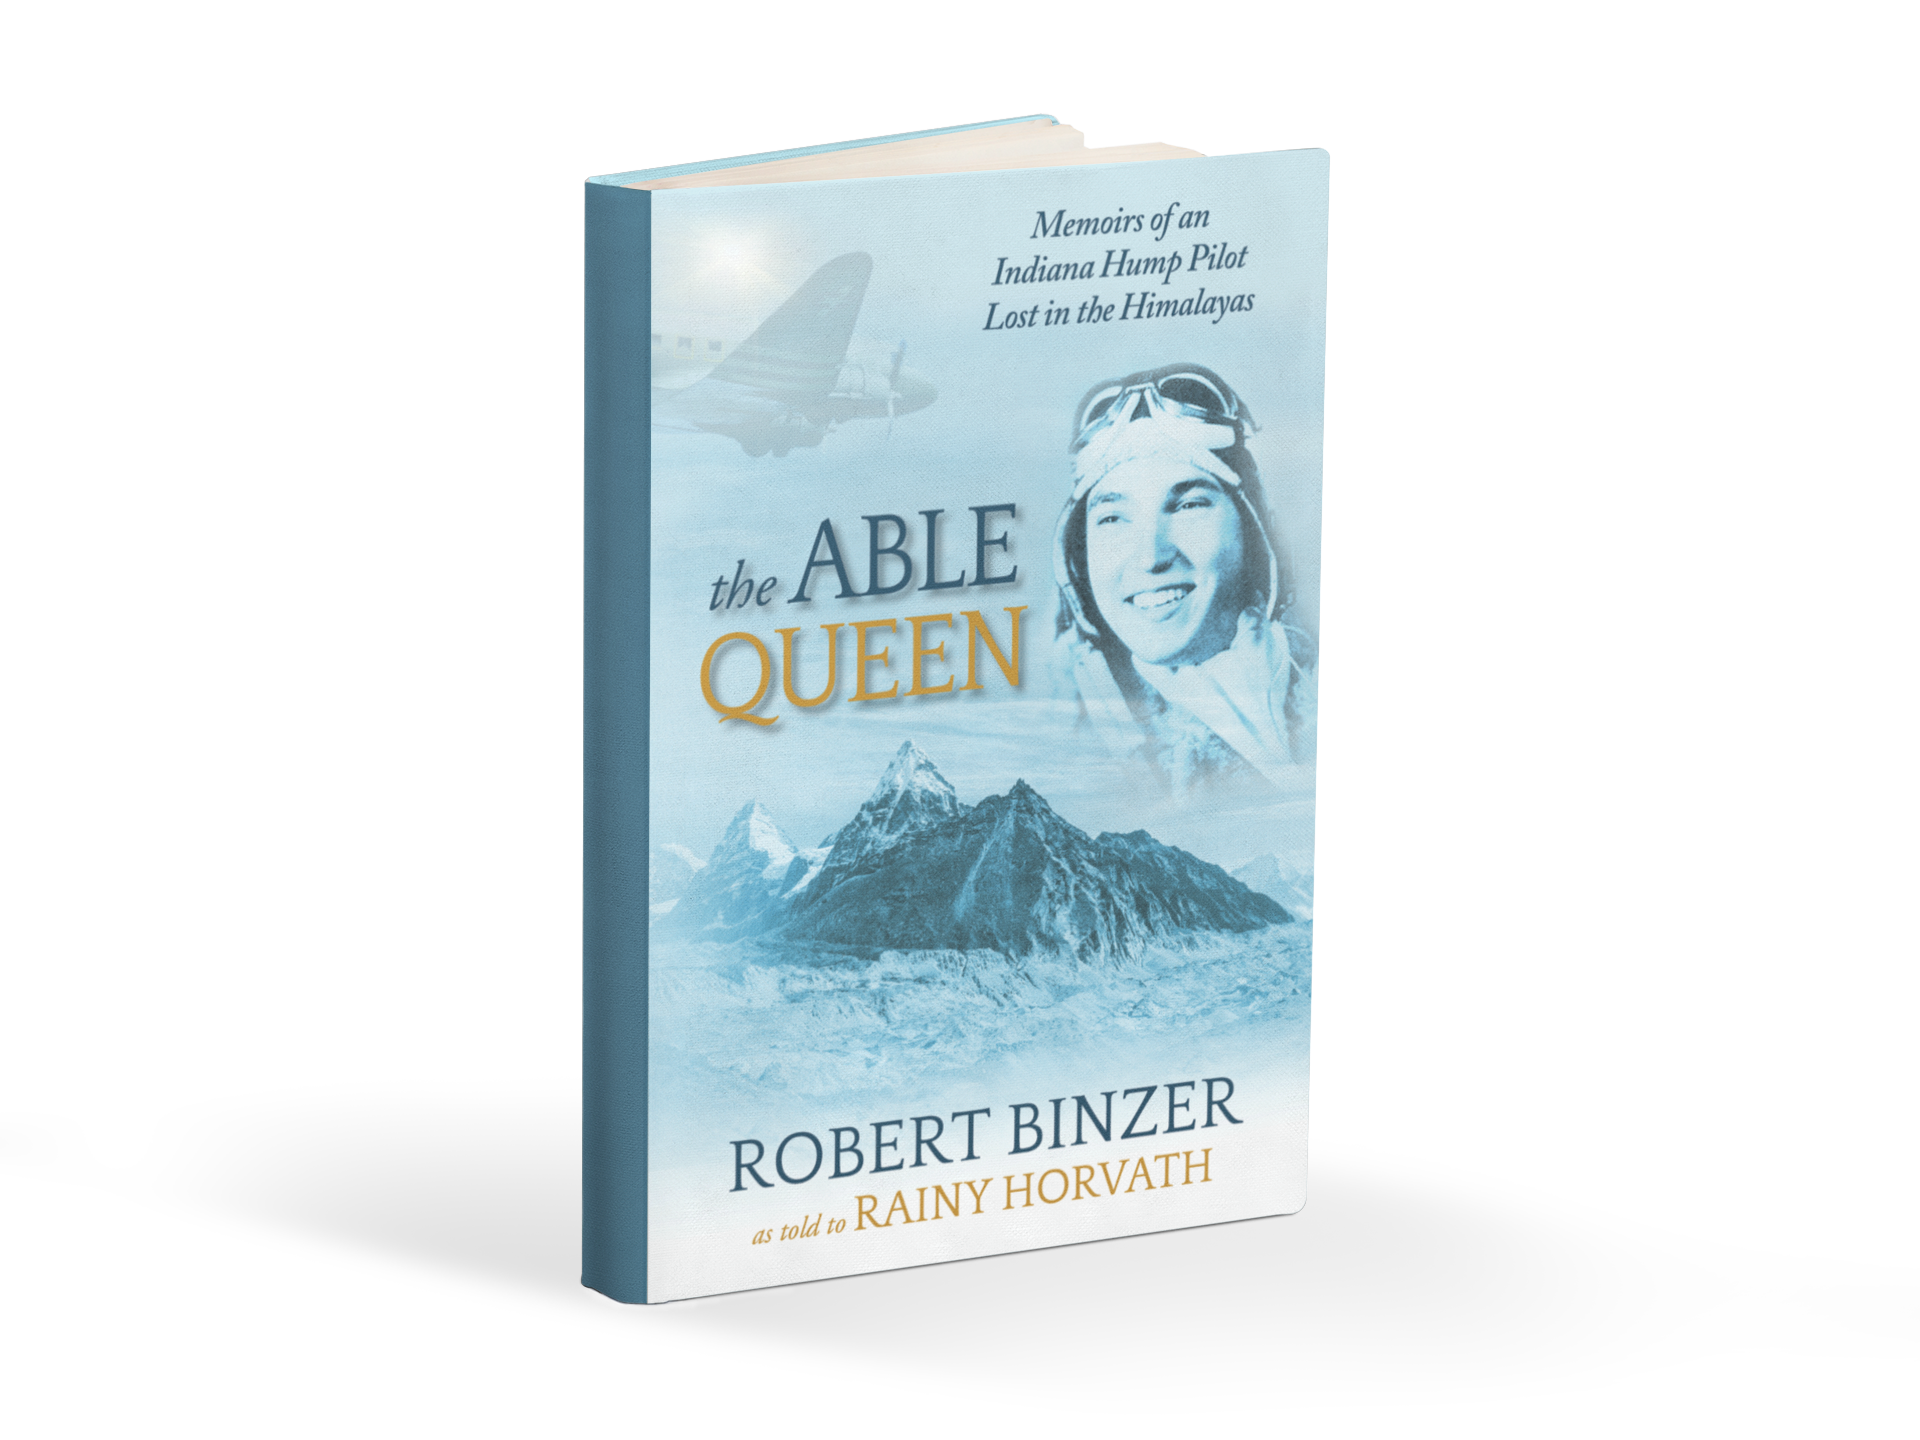 The Able Queen by Rainy Horvath and Robert Binzer Shares a Remarkable World War II Story of Survival